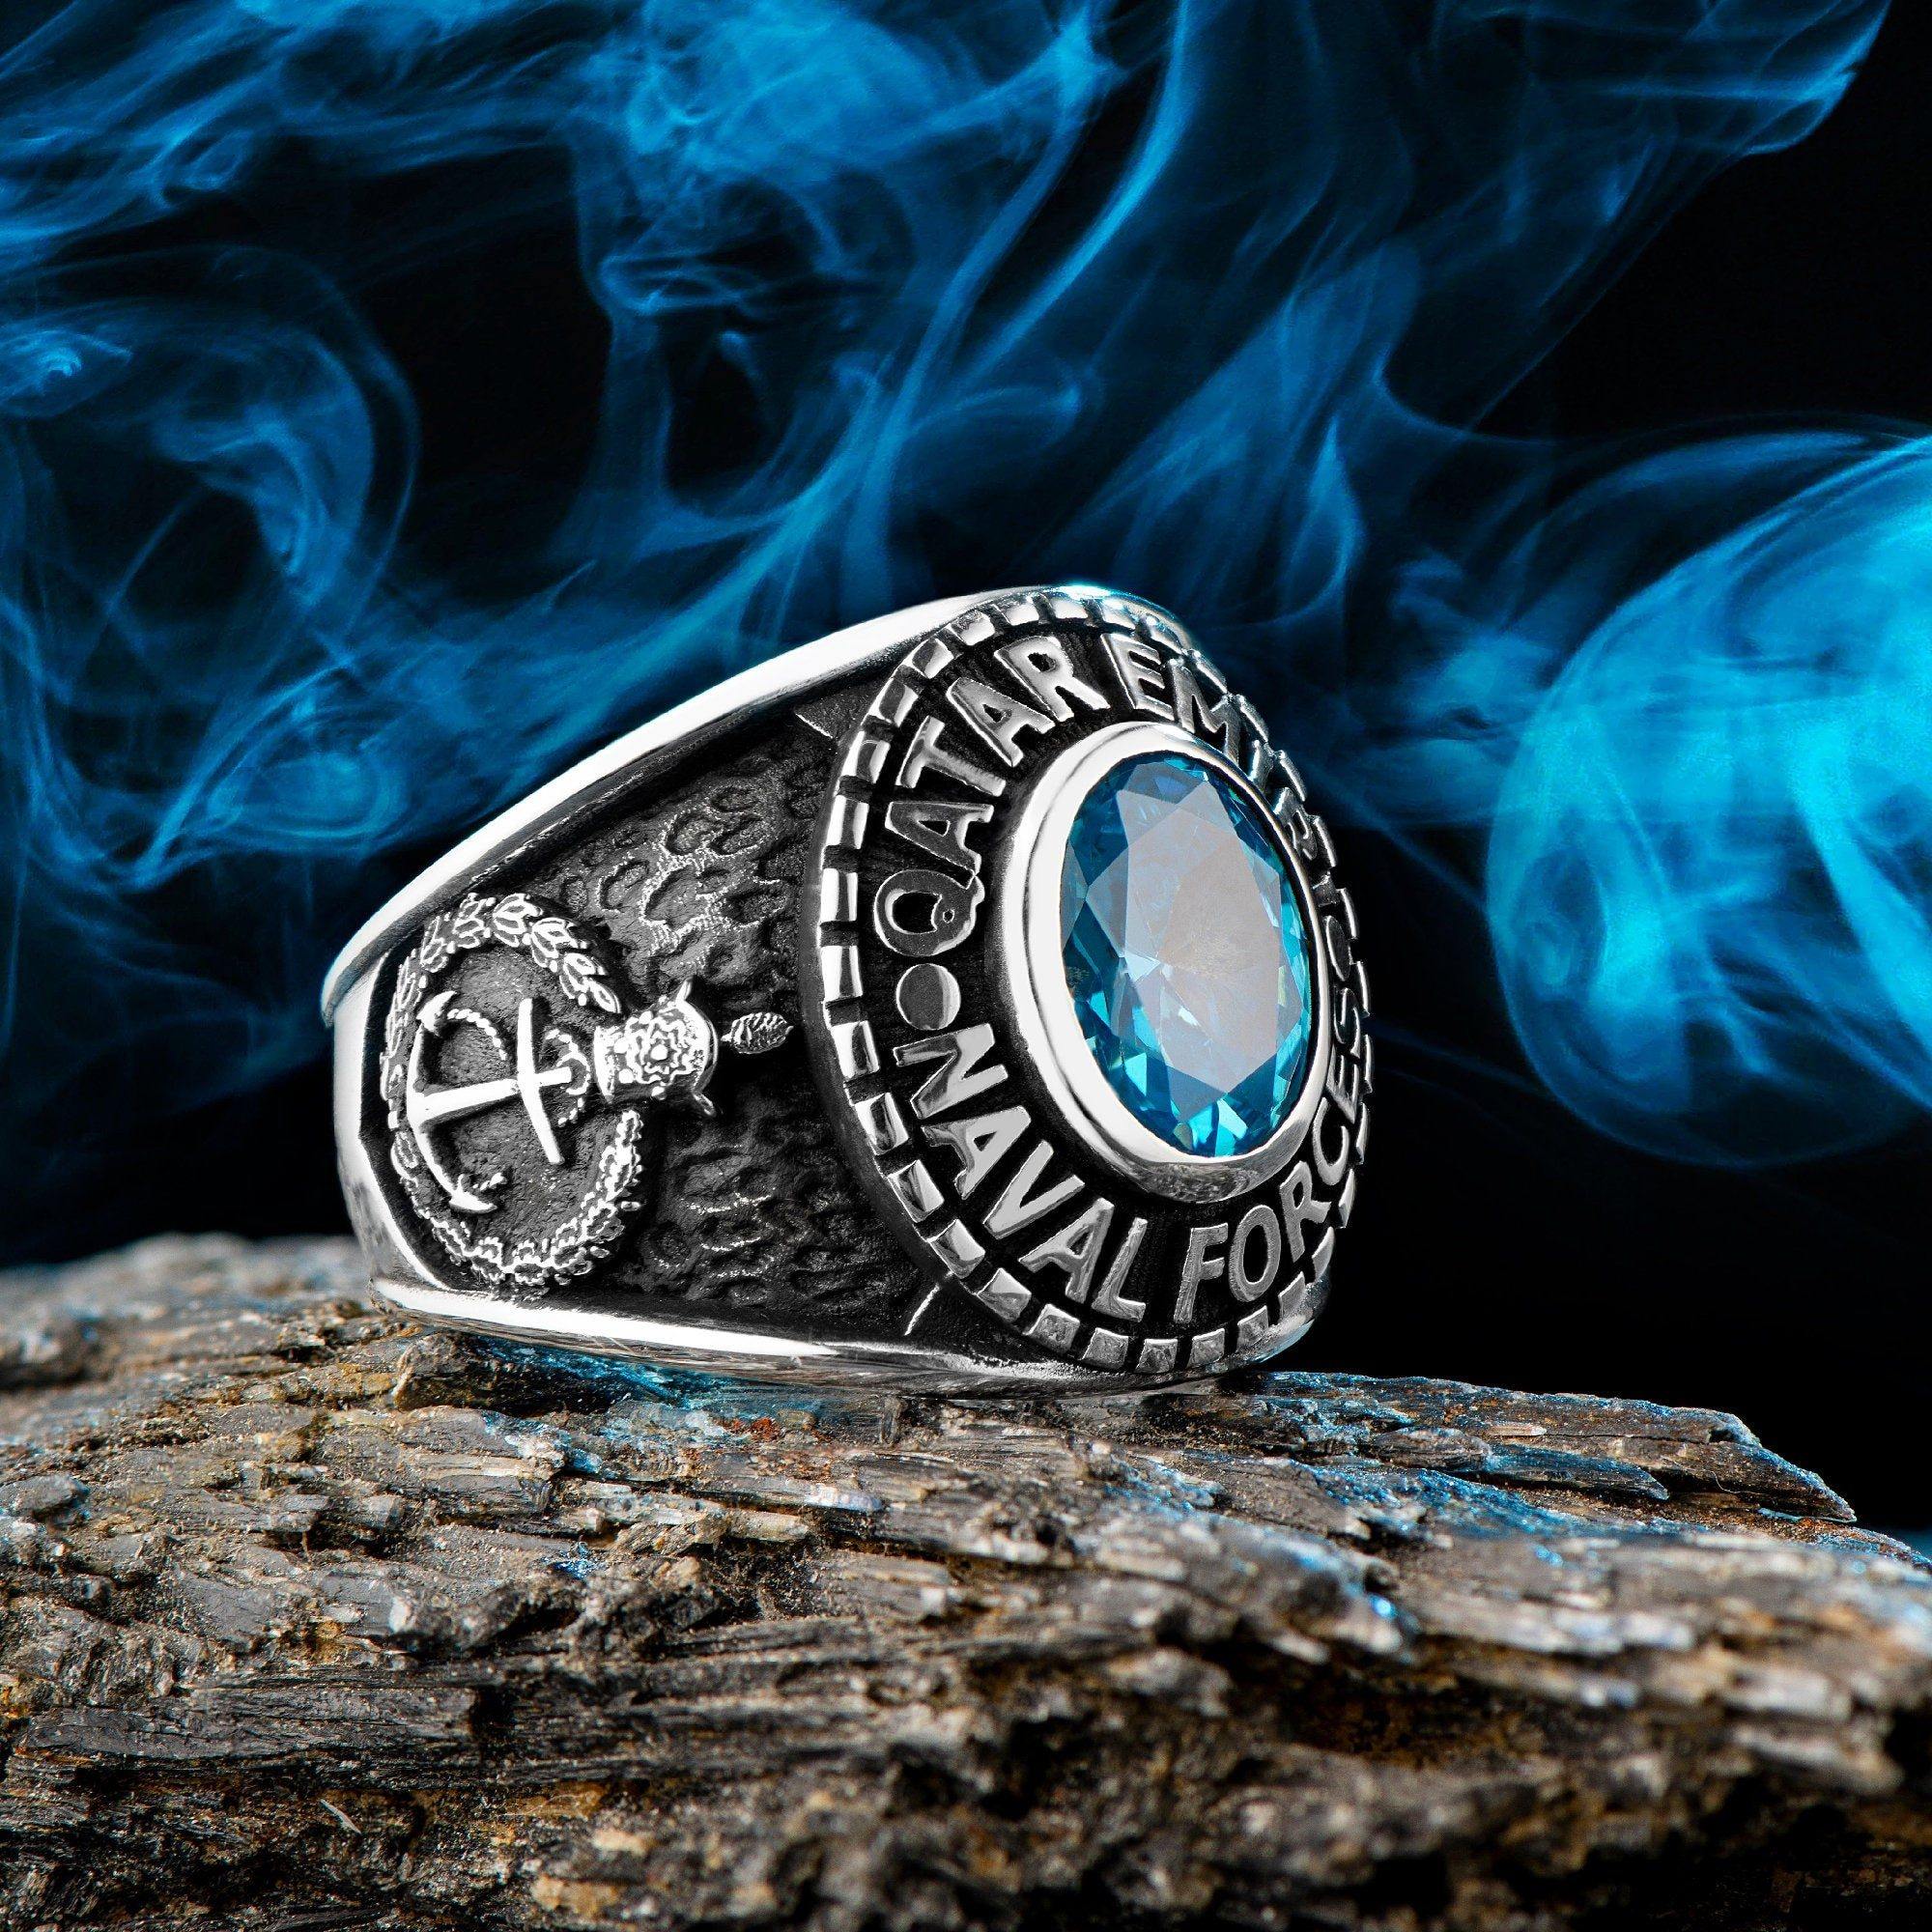 Qatar Emiri Naval Force Ring, Military Rings with Blue Zircon Gemstone - OXO SILVER